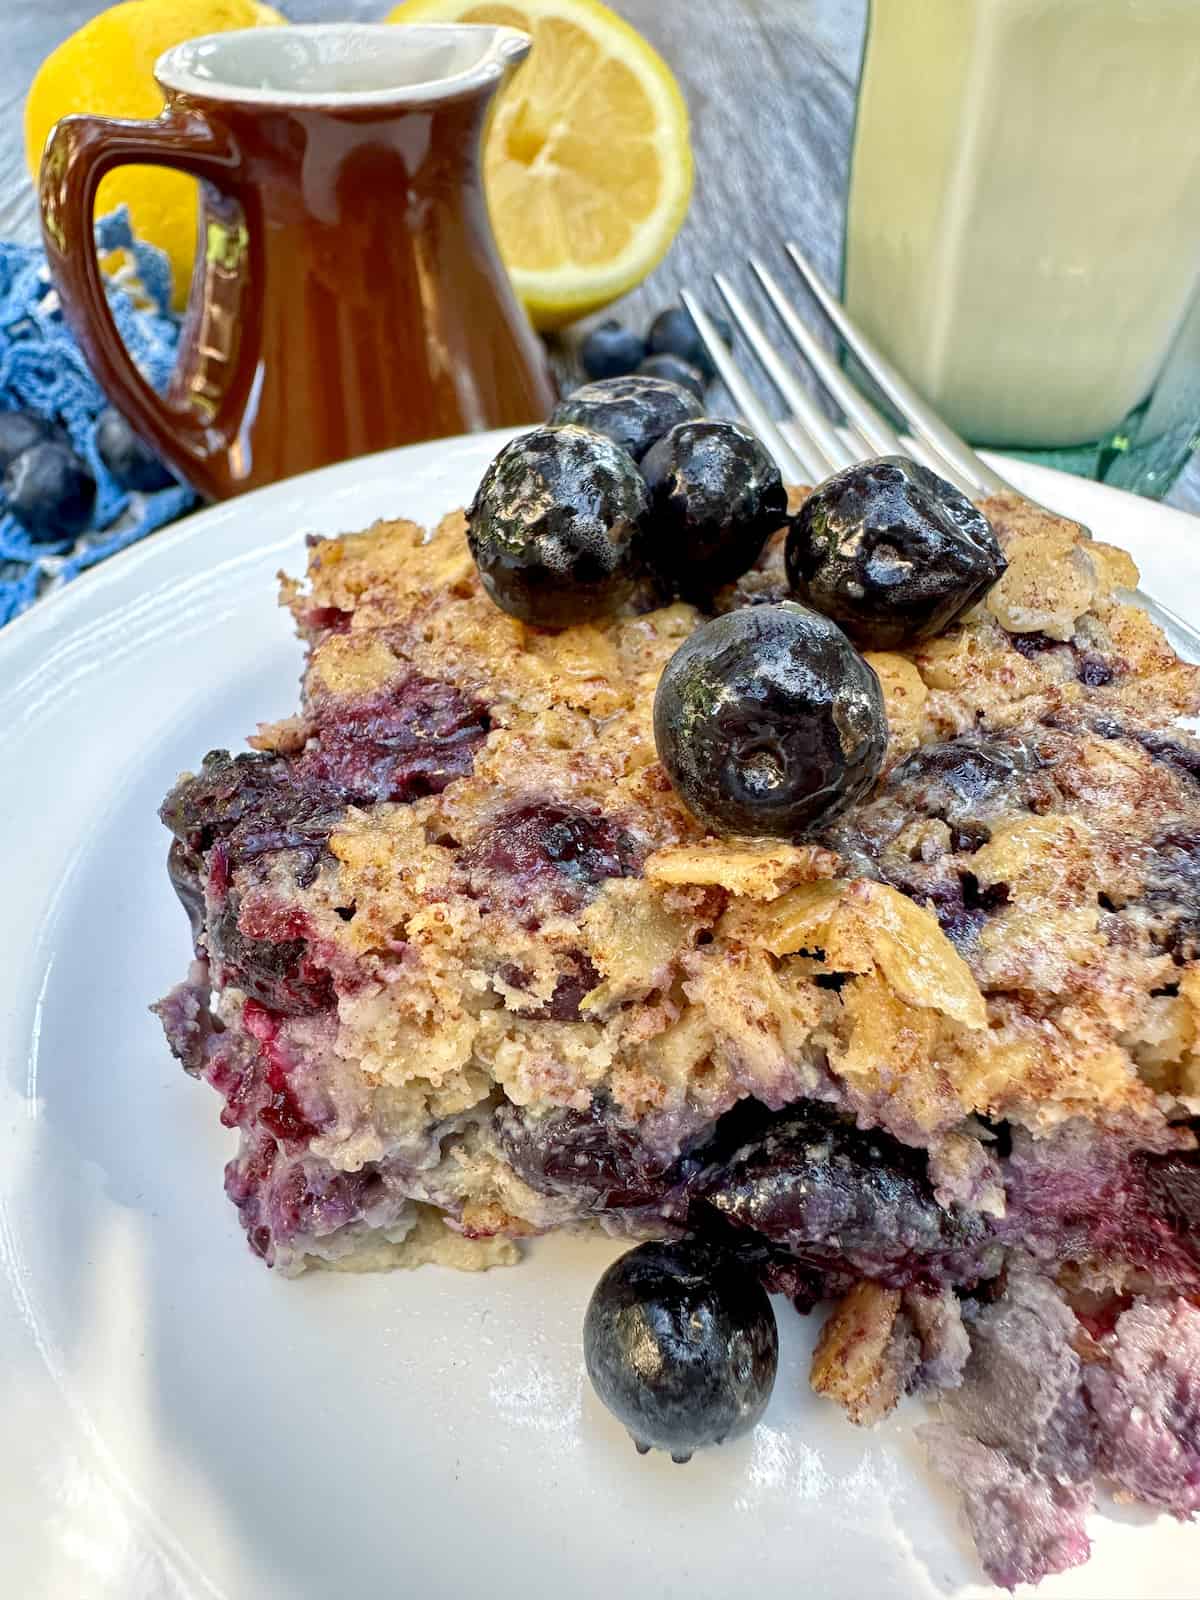 One portion of baked oatmeal with blueberries on the plate and on top with a wedge of lemon in the background.